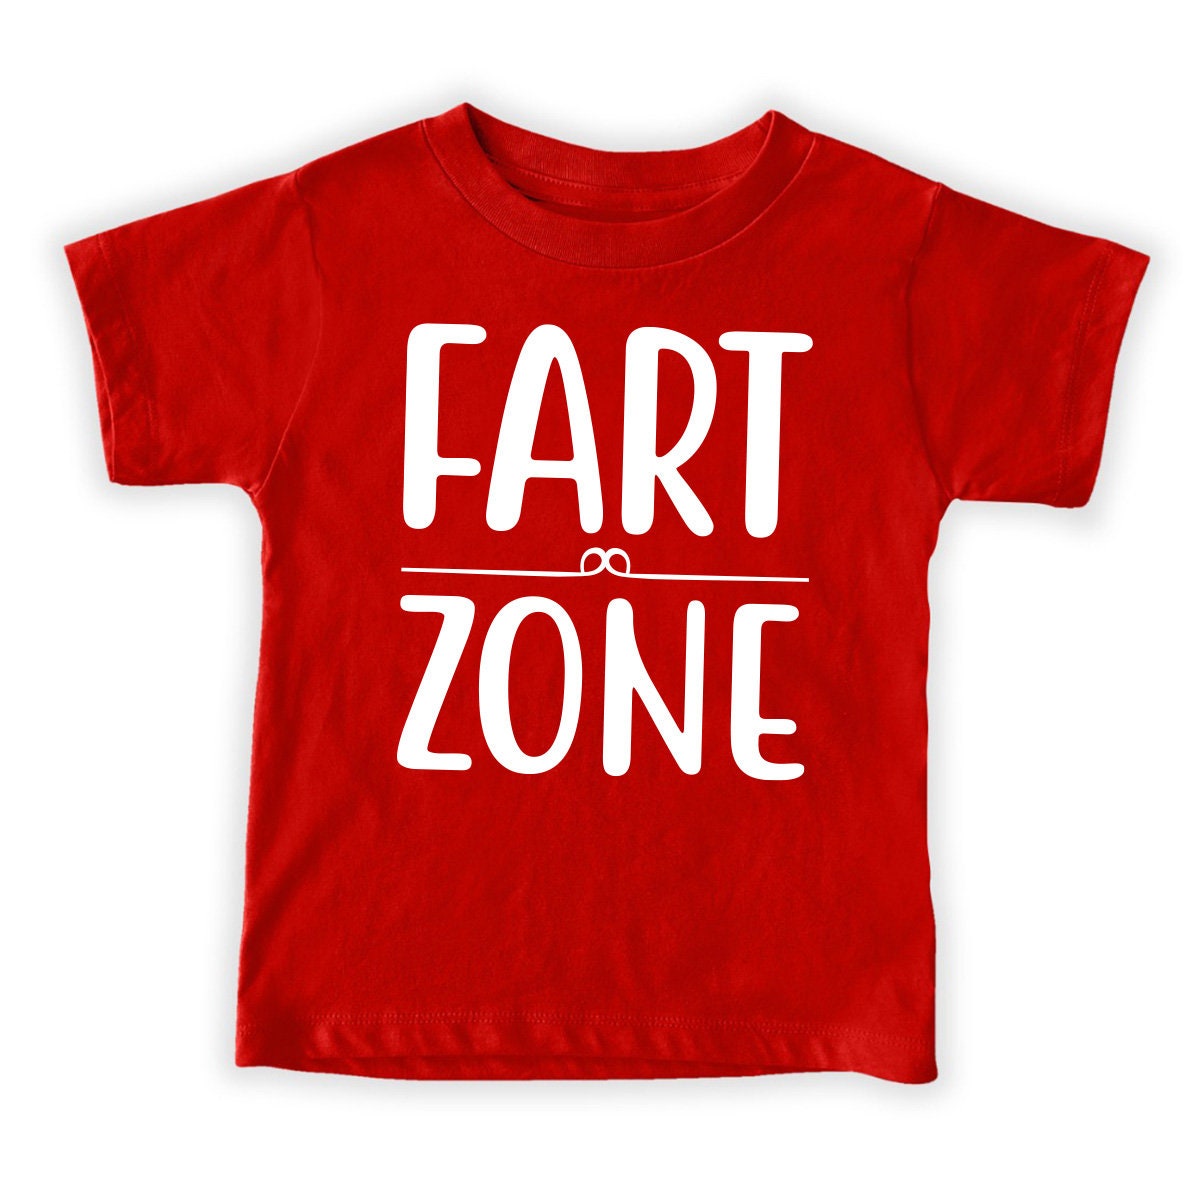 Funny Bodysuit, Funny Toddler, Funny Youth, Fart Zone Bodysuit, Fart Zone Youth, Fart Zone Toddler, Gift For Baby, Grandbaby Shirt - Fastdeliverytees.com